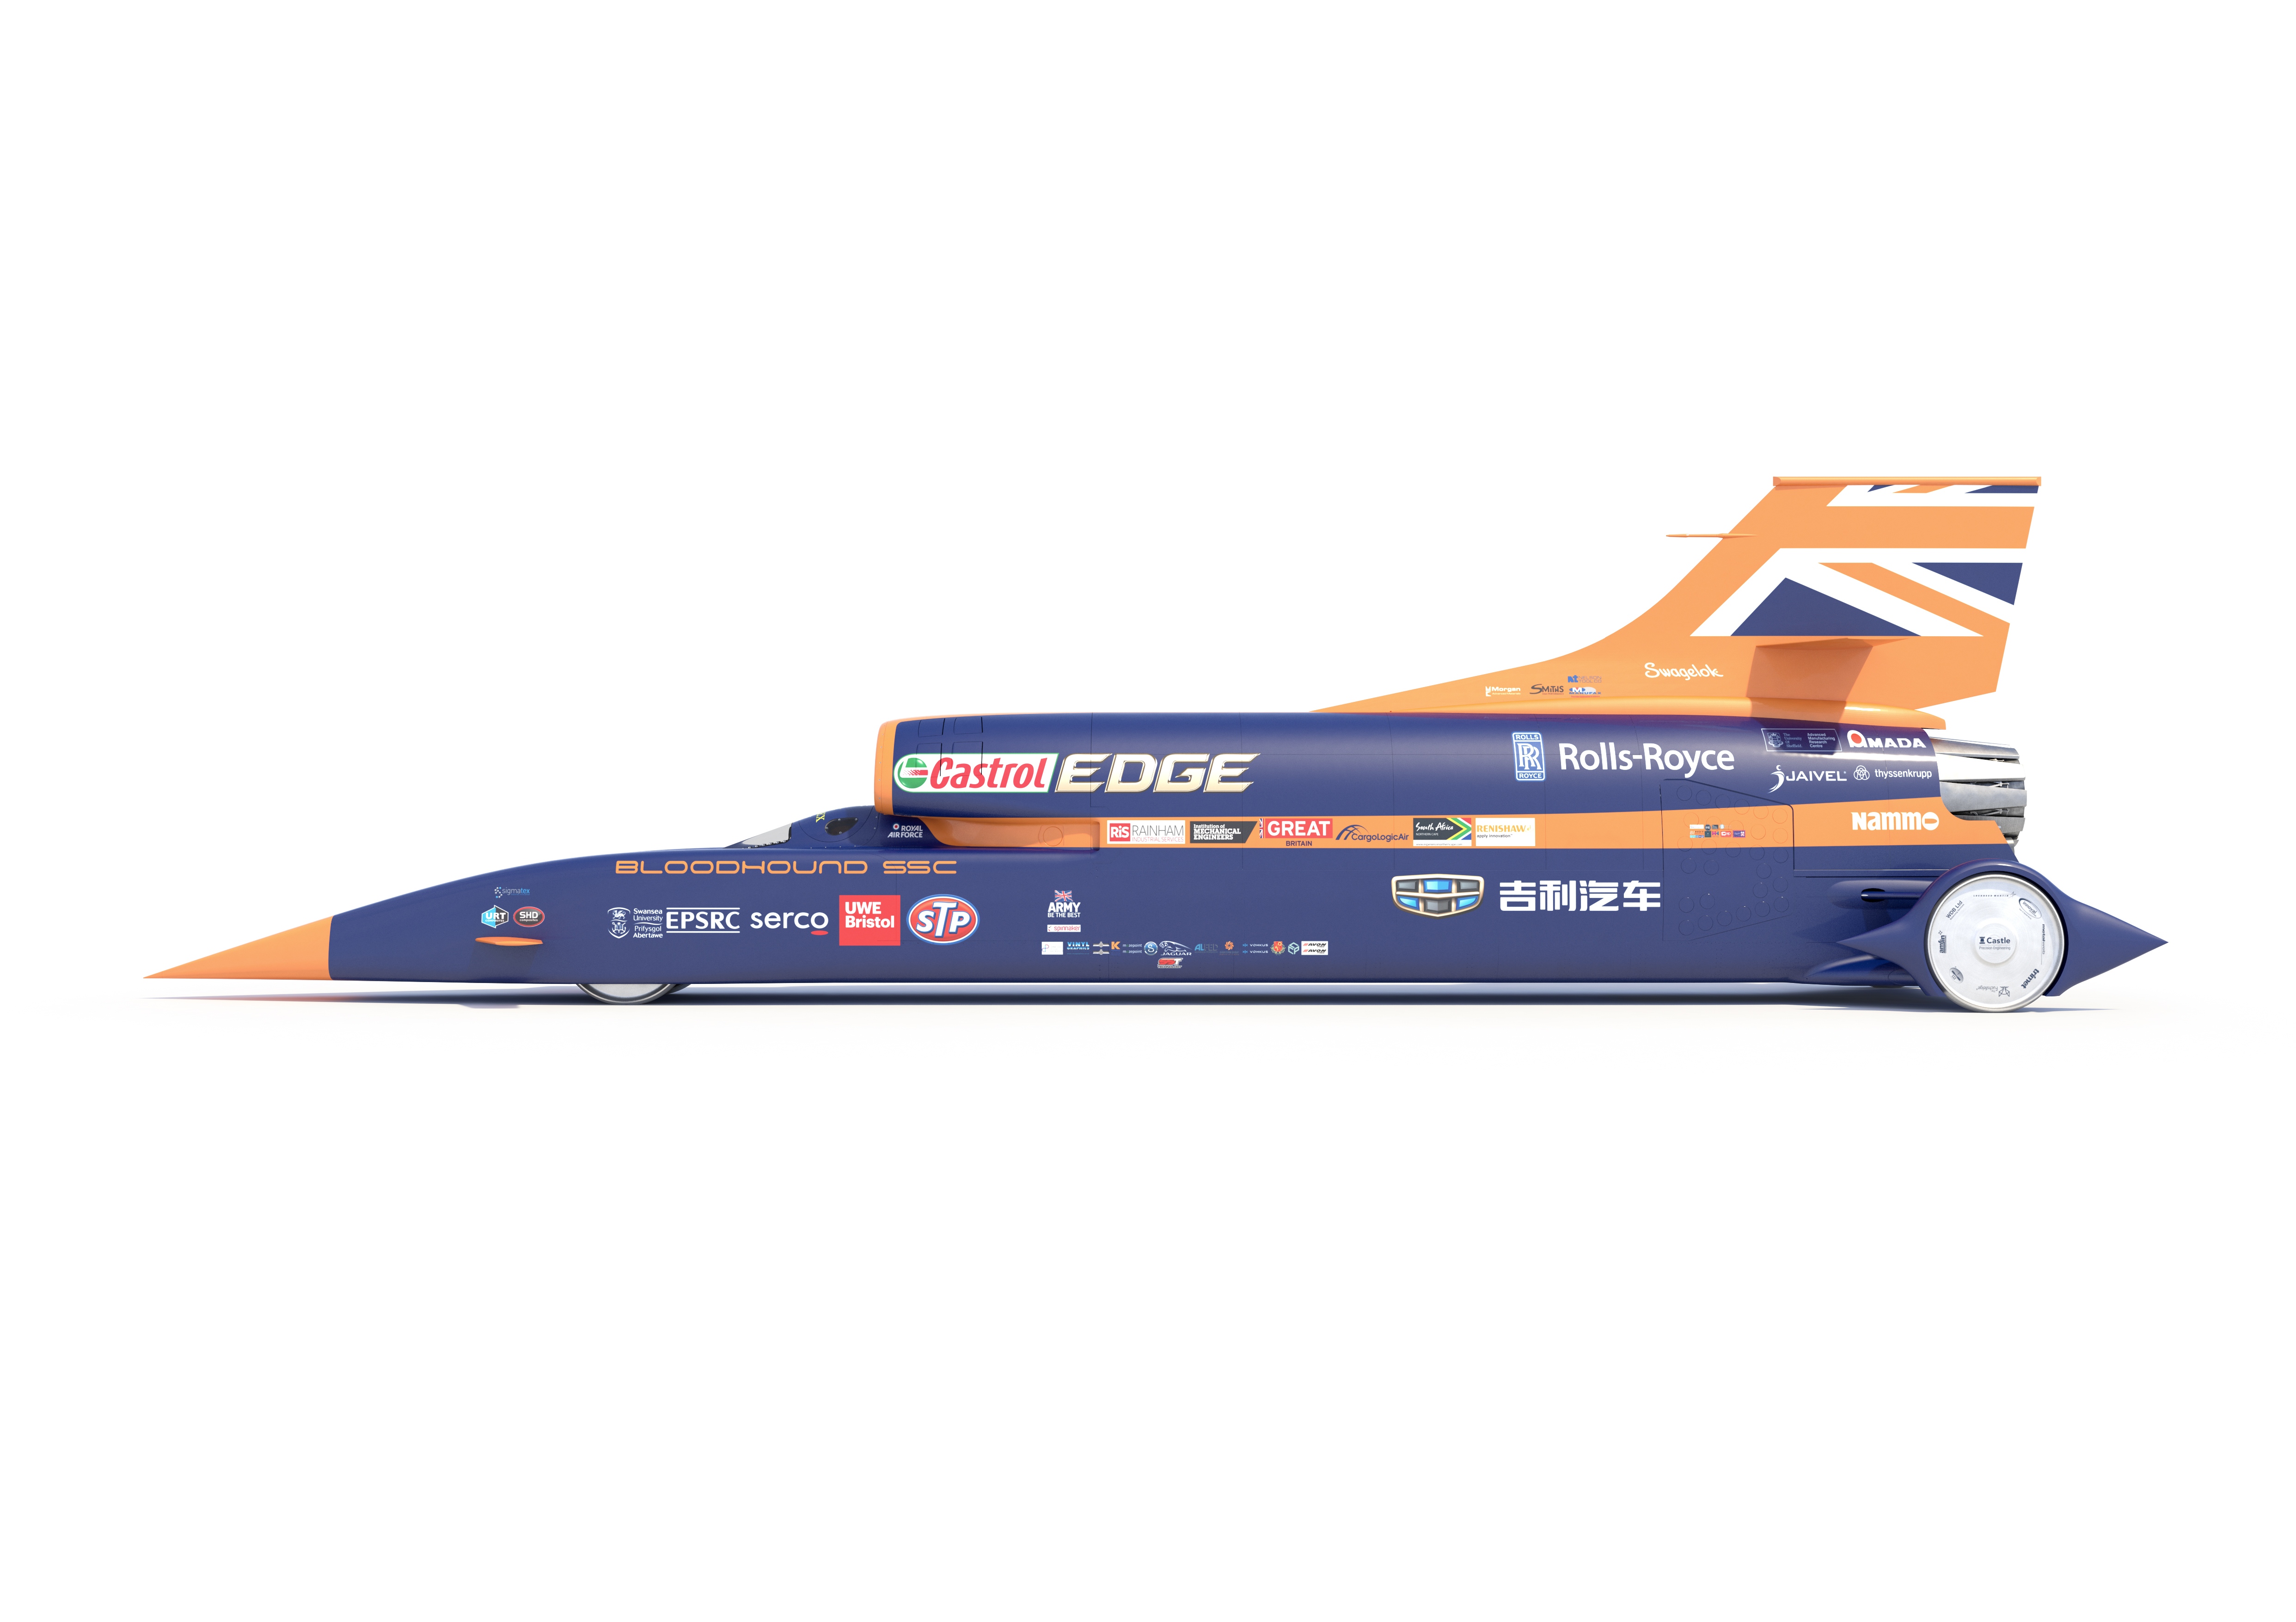 The Bloodhound is a supersonic car designed to break the world land speed record by reaching 1000 mph.